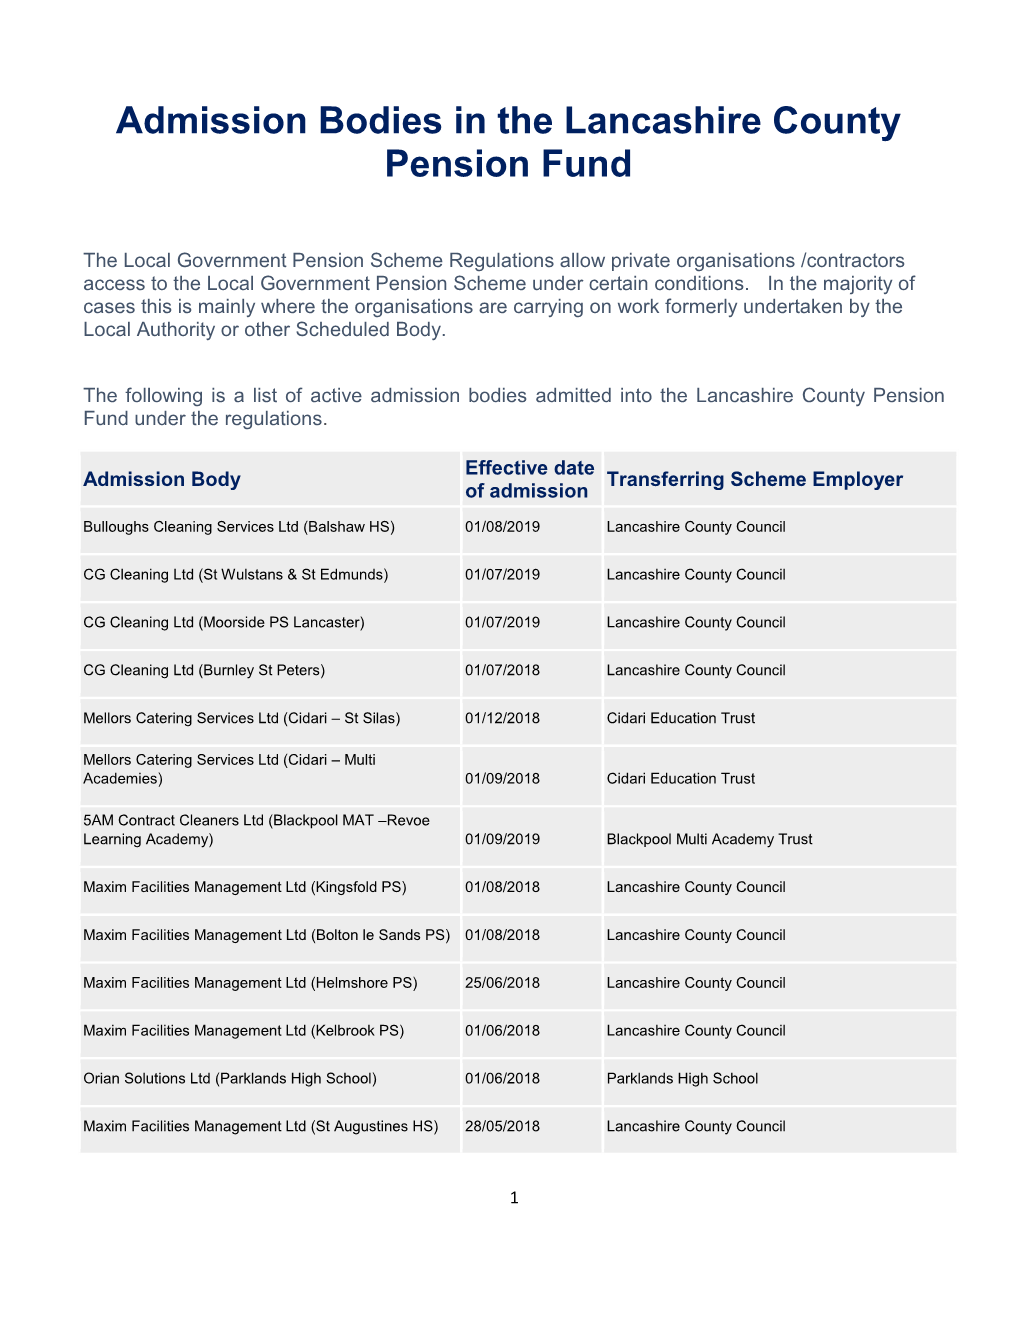 Admission Bodies in the Lancashire County Pension Fund